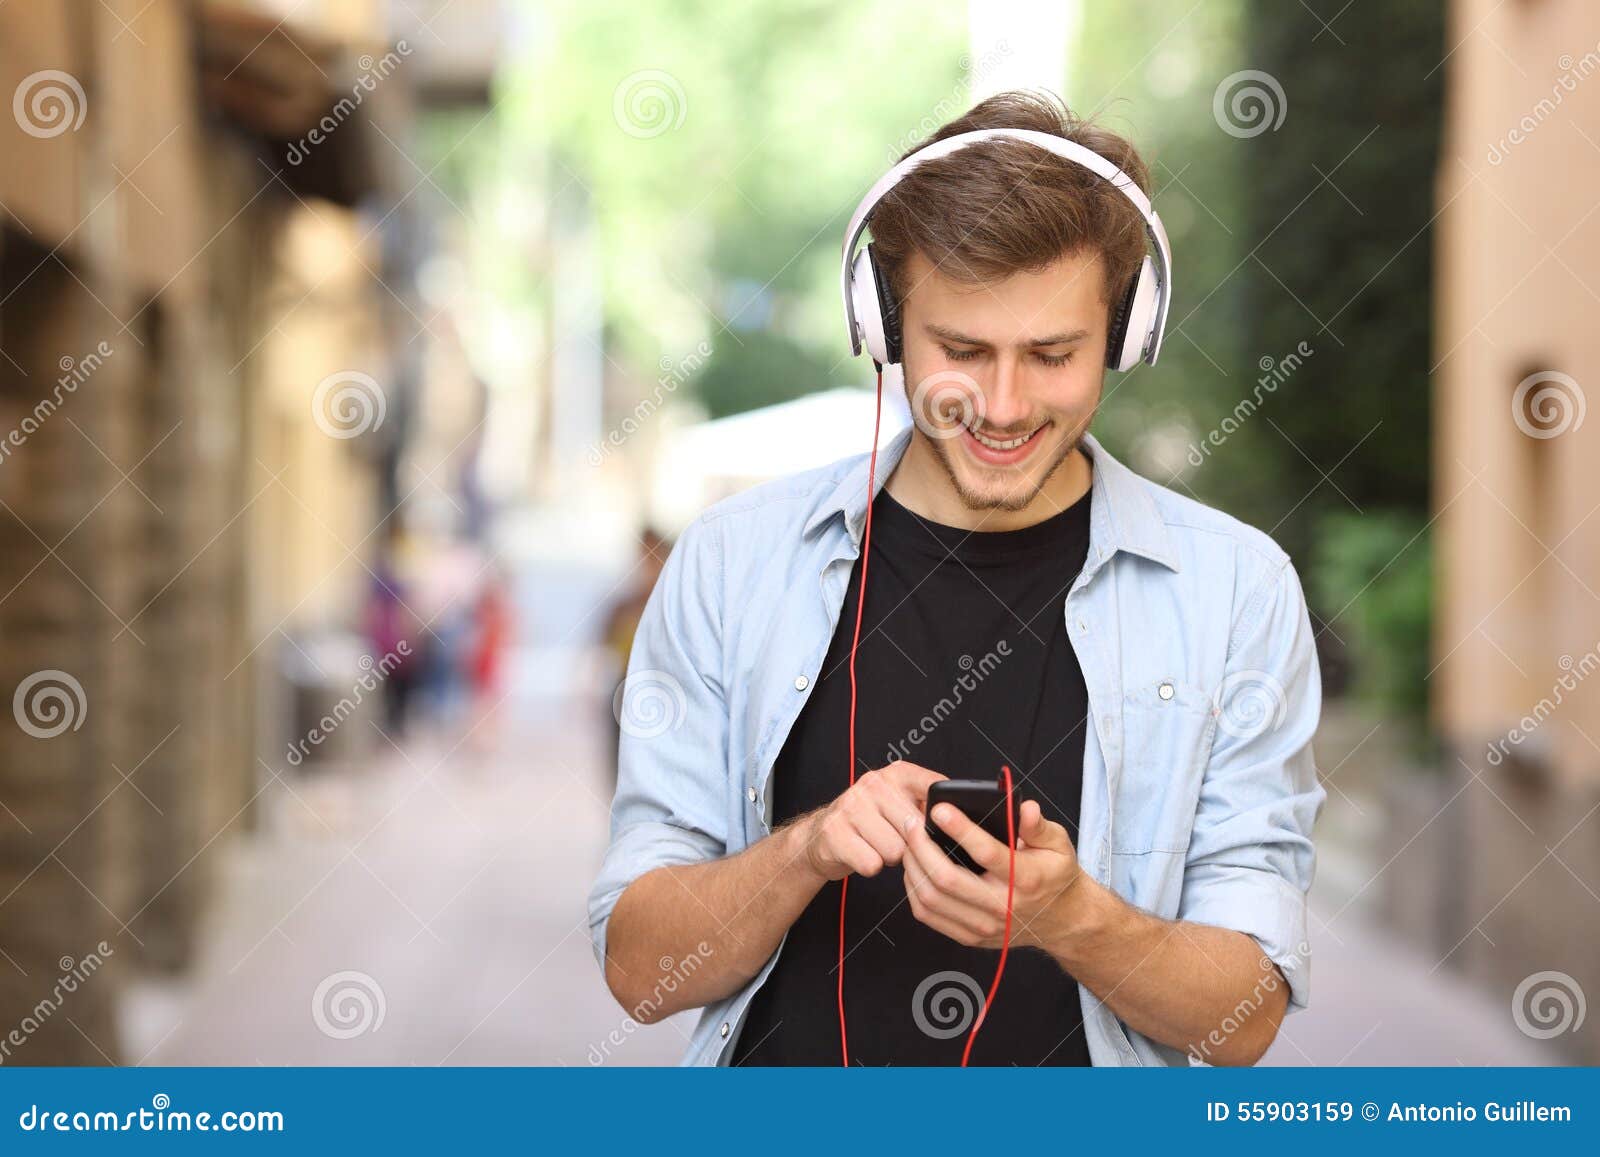 guy walking and using a smart phone with headphones